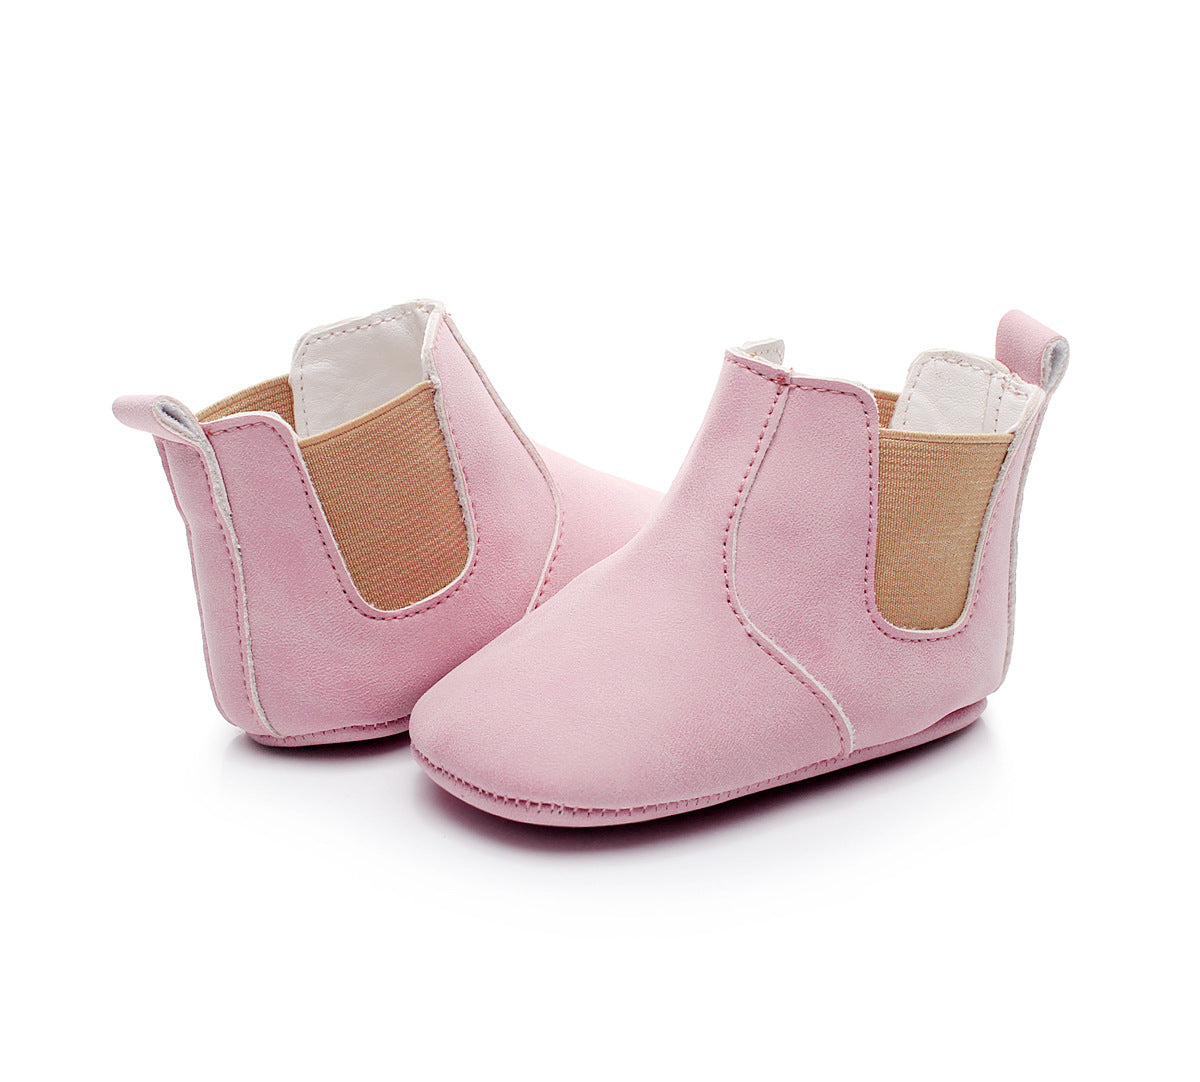 Baby Shoes Baby Xie Shoes Toddler Shoes Elastic PU Soft Shoes Children Shoes